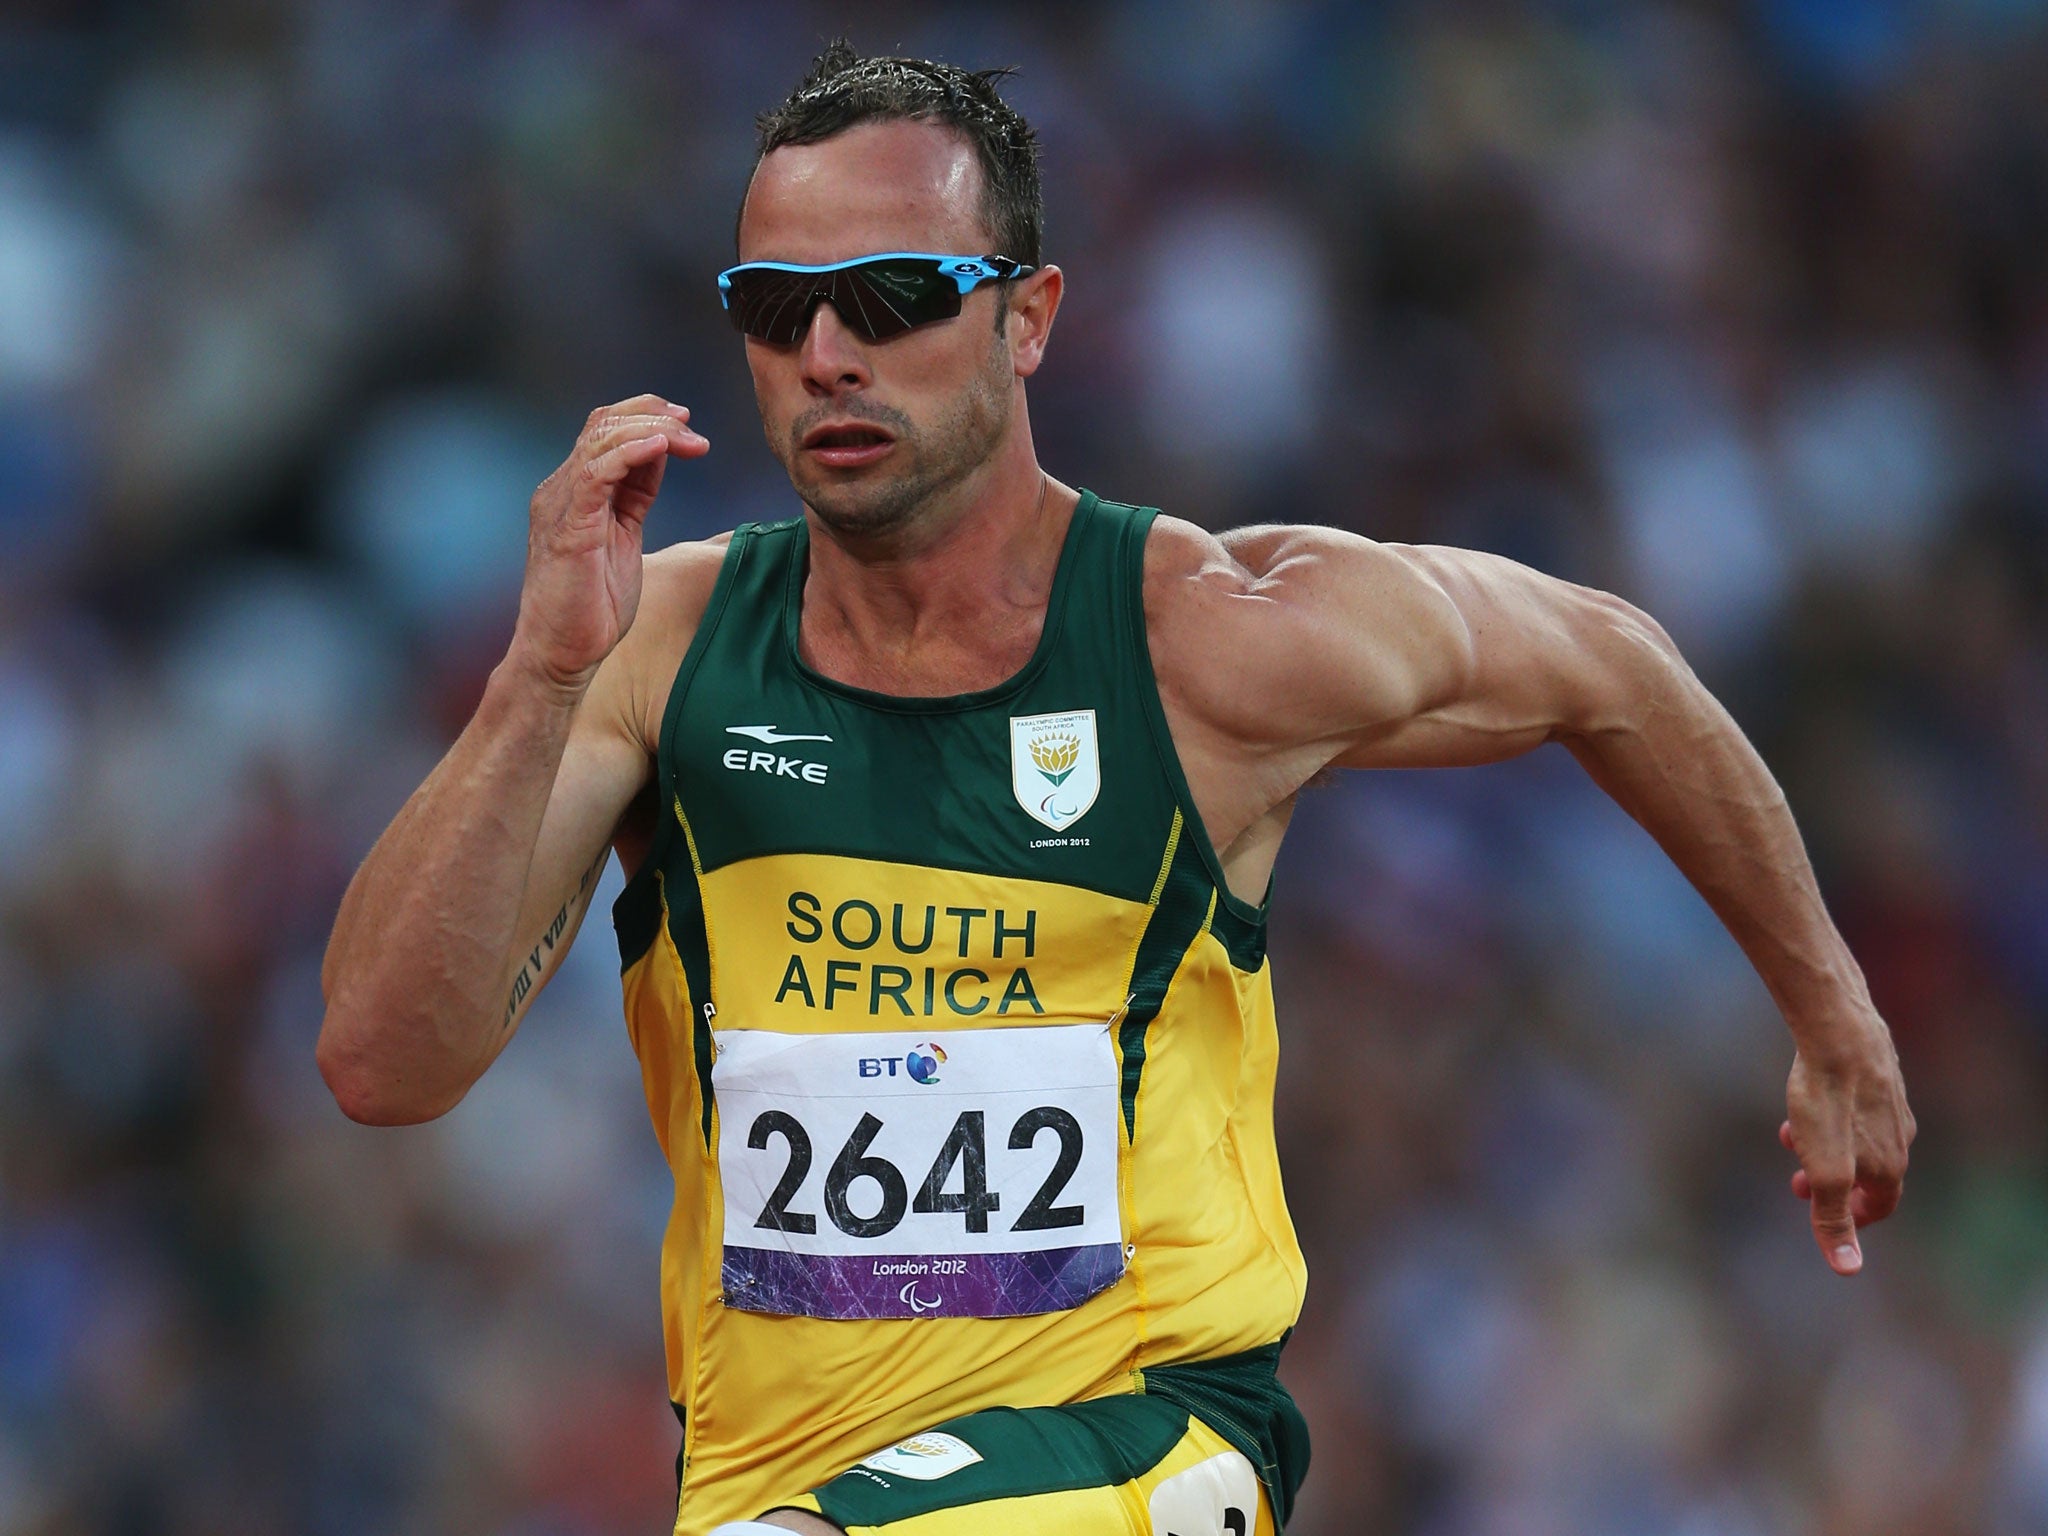 Oscar Pistorius must provide authorities with his travel plans at least a week before he leaves South Africa